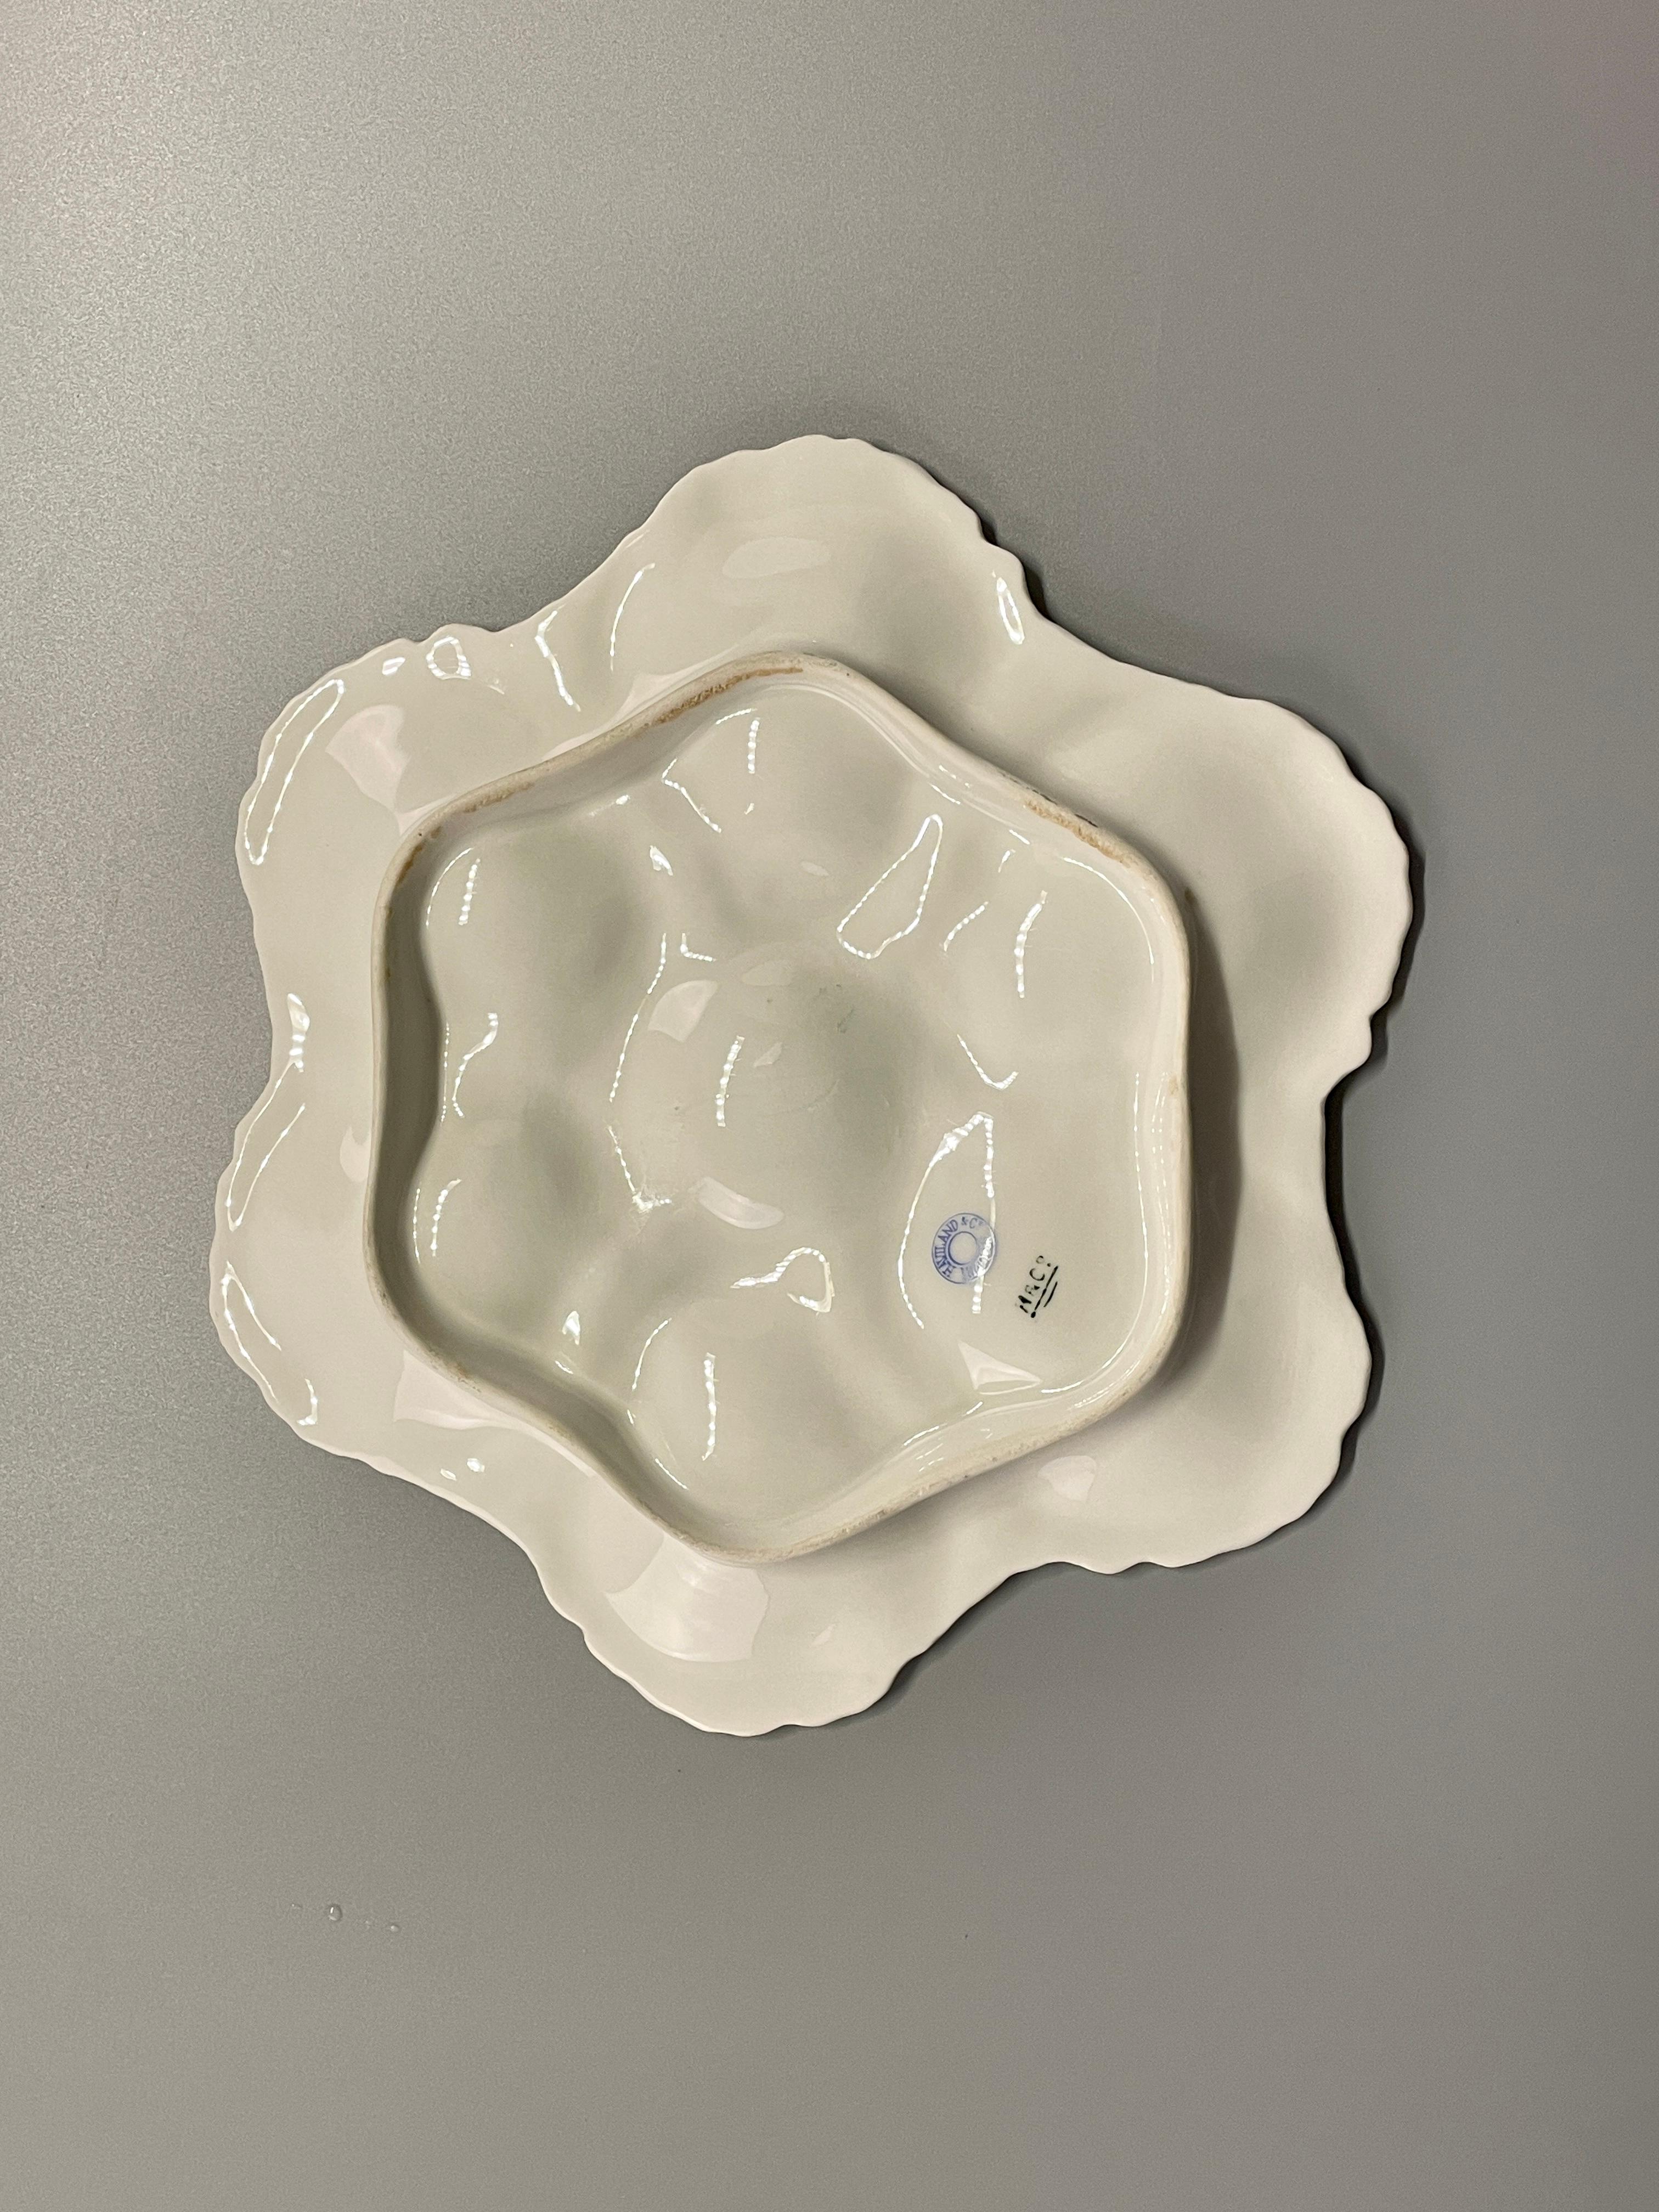 European Early 20th c French Porcelain Oyster Plates, Limoges, set of 4 For Sale